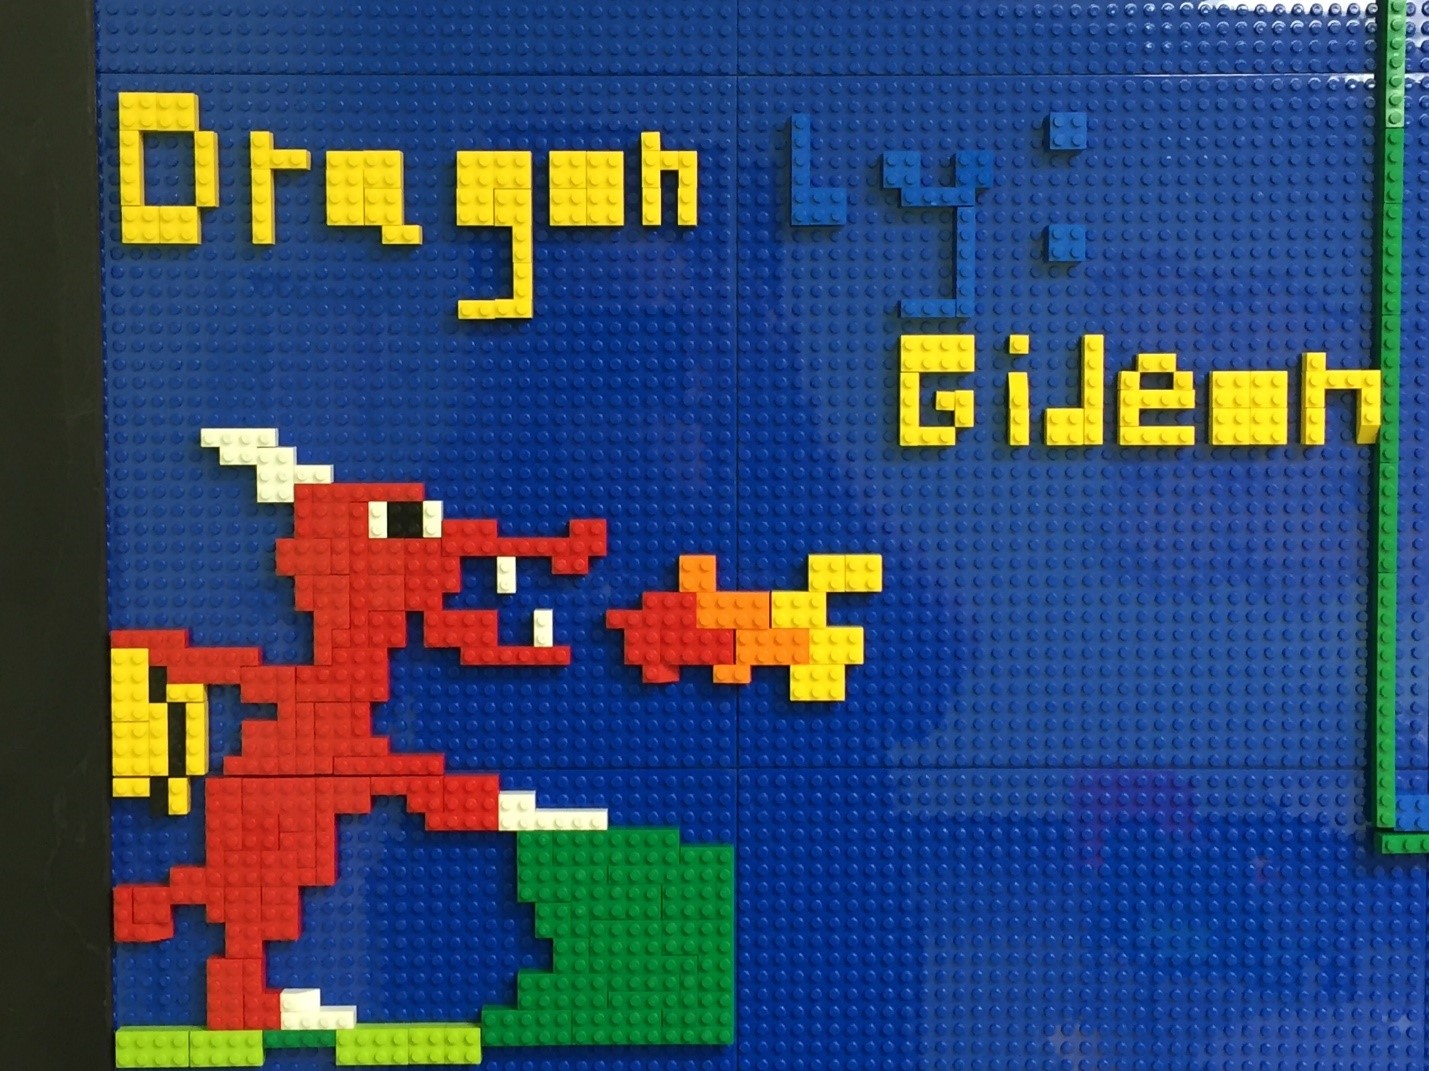 Dragon design created on the lego wall in the Family Art Studio.